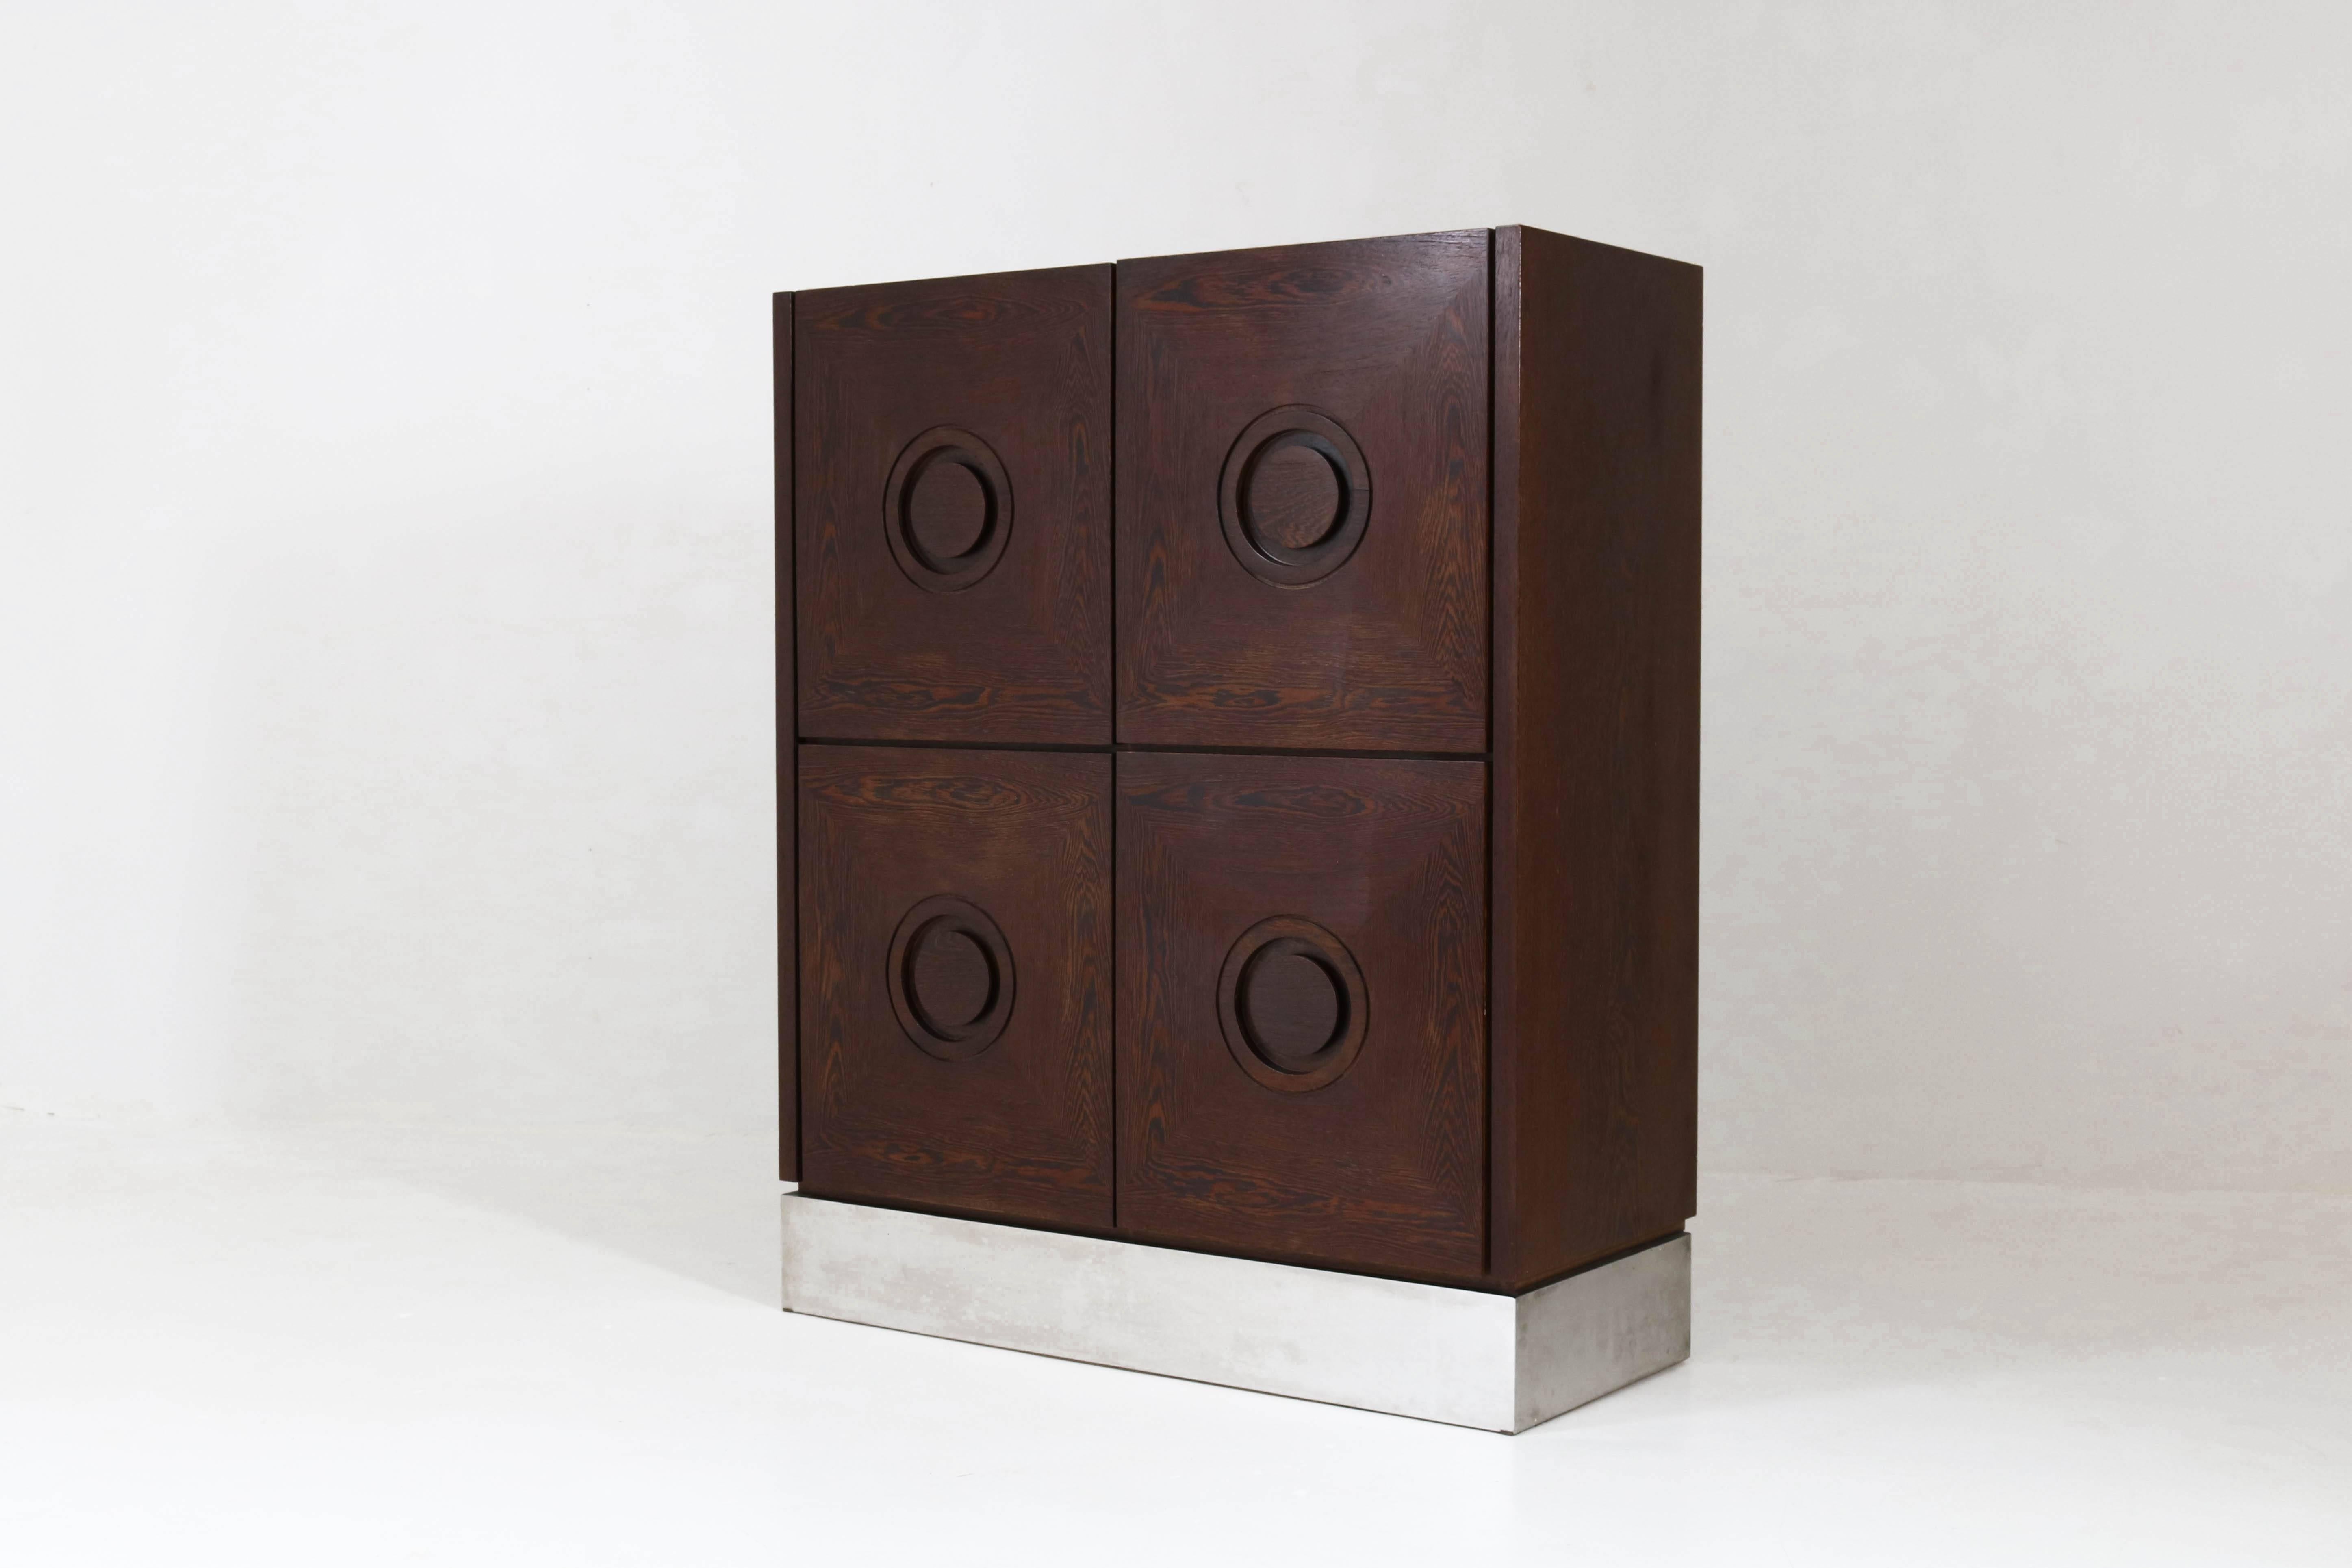 Stunning Mid-Century Modern Brutalist Belgium bar cabinet, 1970s.
Wengé with graphical door panels and metal lining.
This striking piece of furniture was purchased at the famous Amsterdam department store De Bijenkorf
during the 1970s.
In good